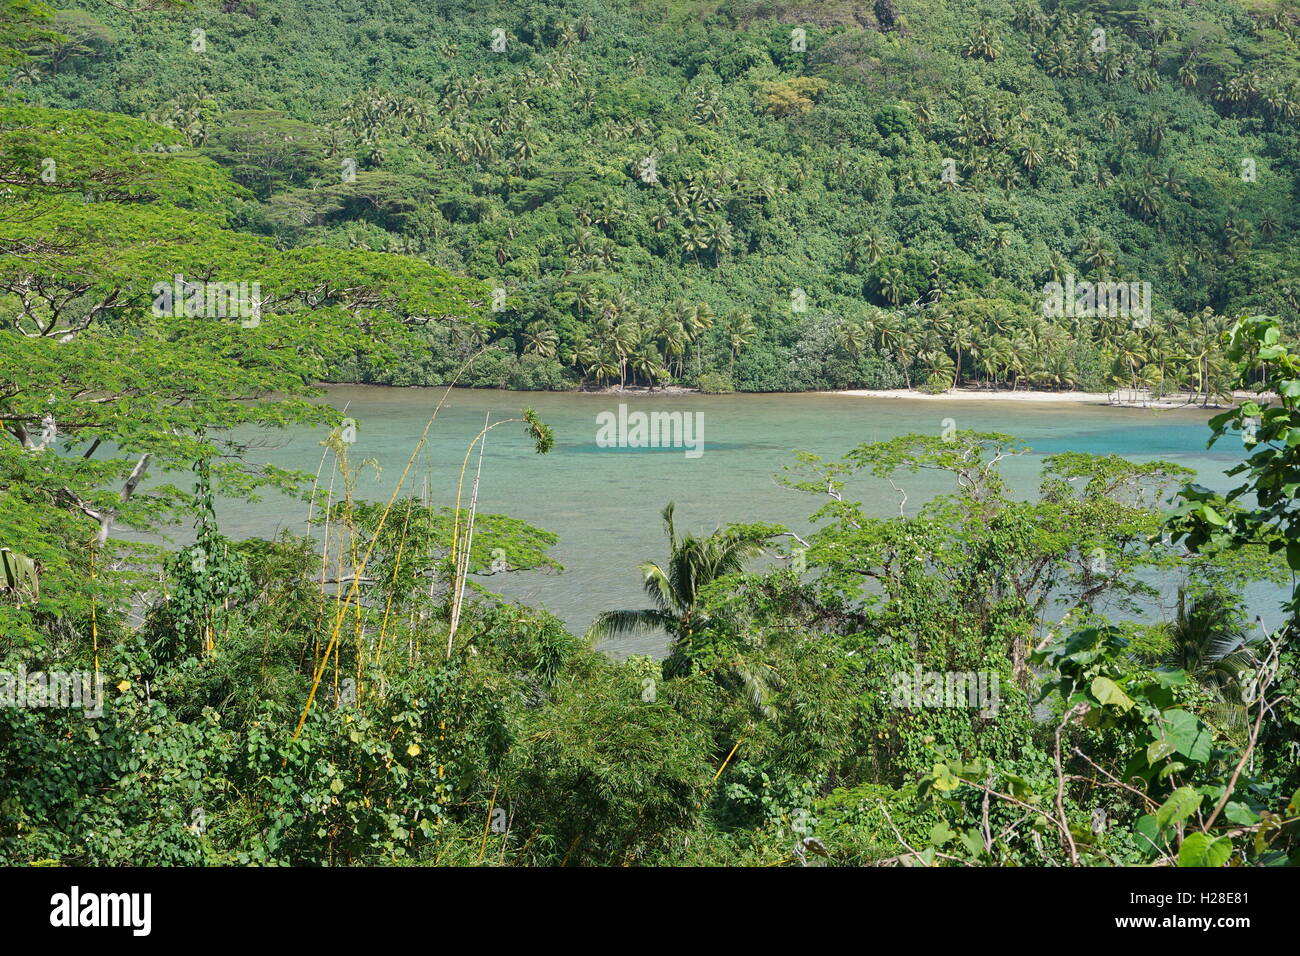 Huahine island coastal landscape, the lagoon surrounded by lush green vegetation, south Pacific ocean, French Polynesia Stock Photo